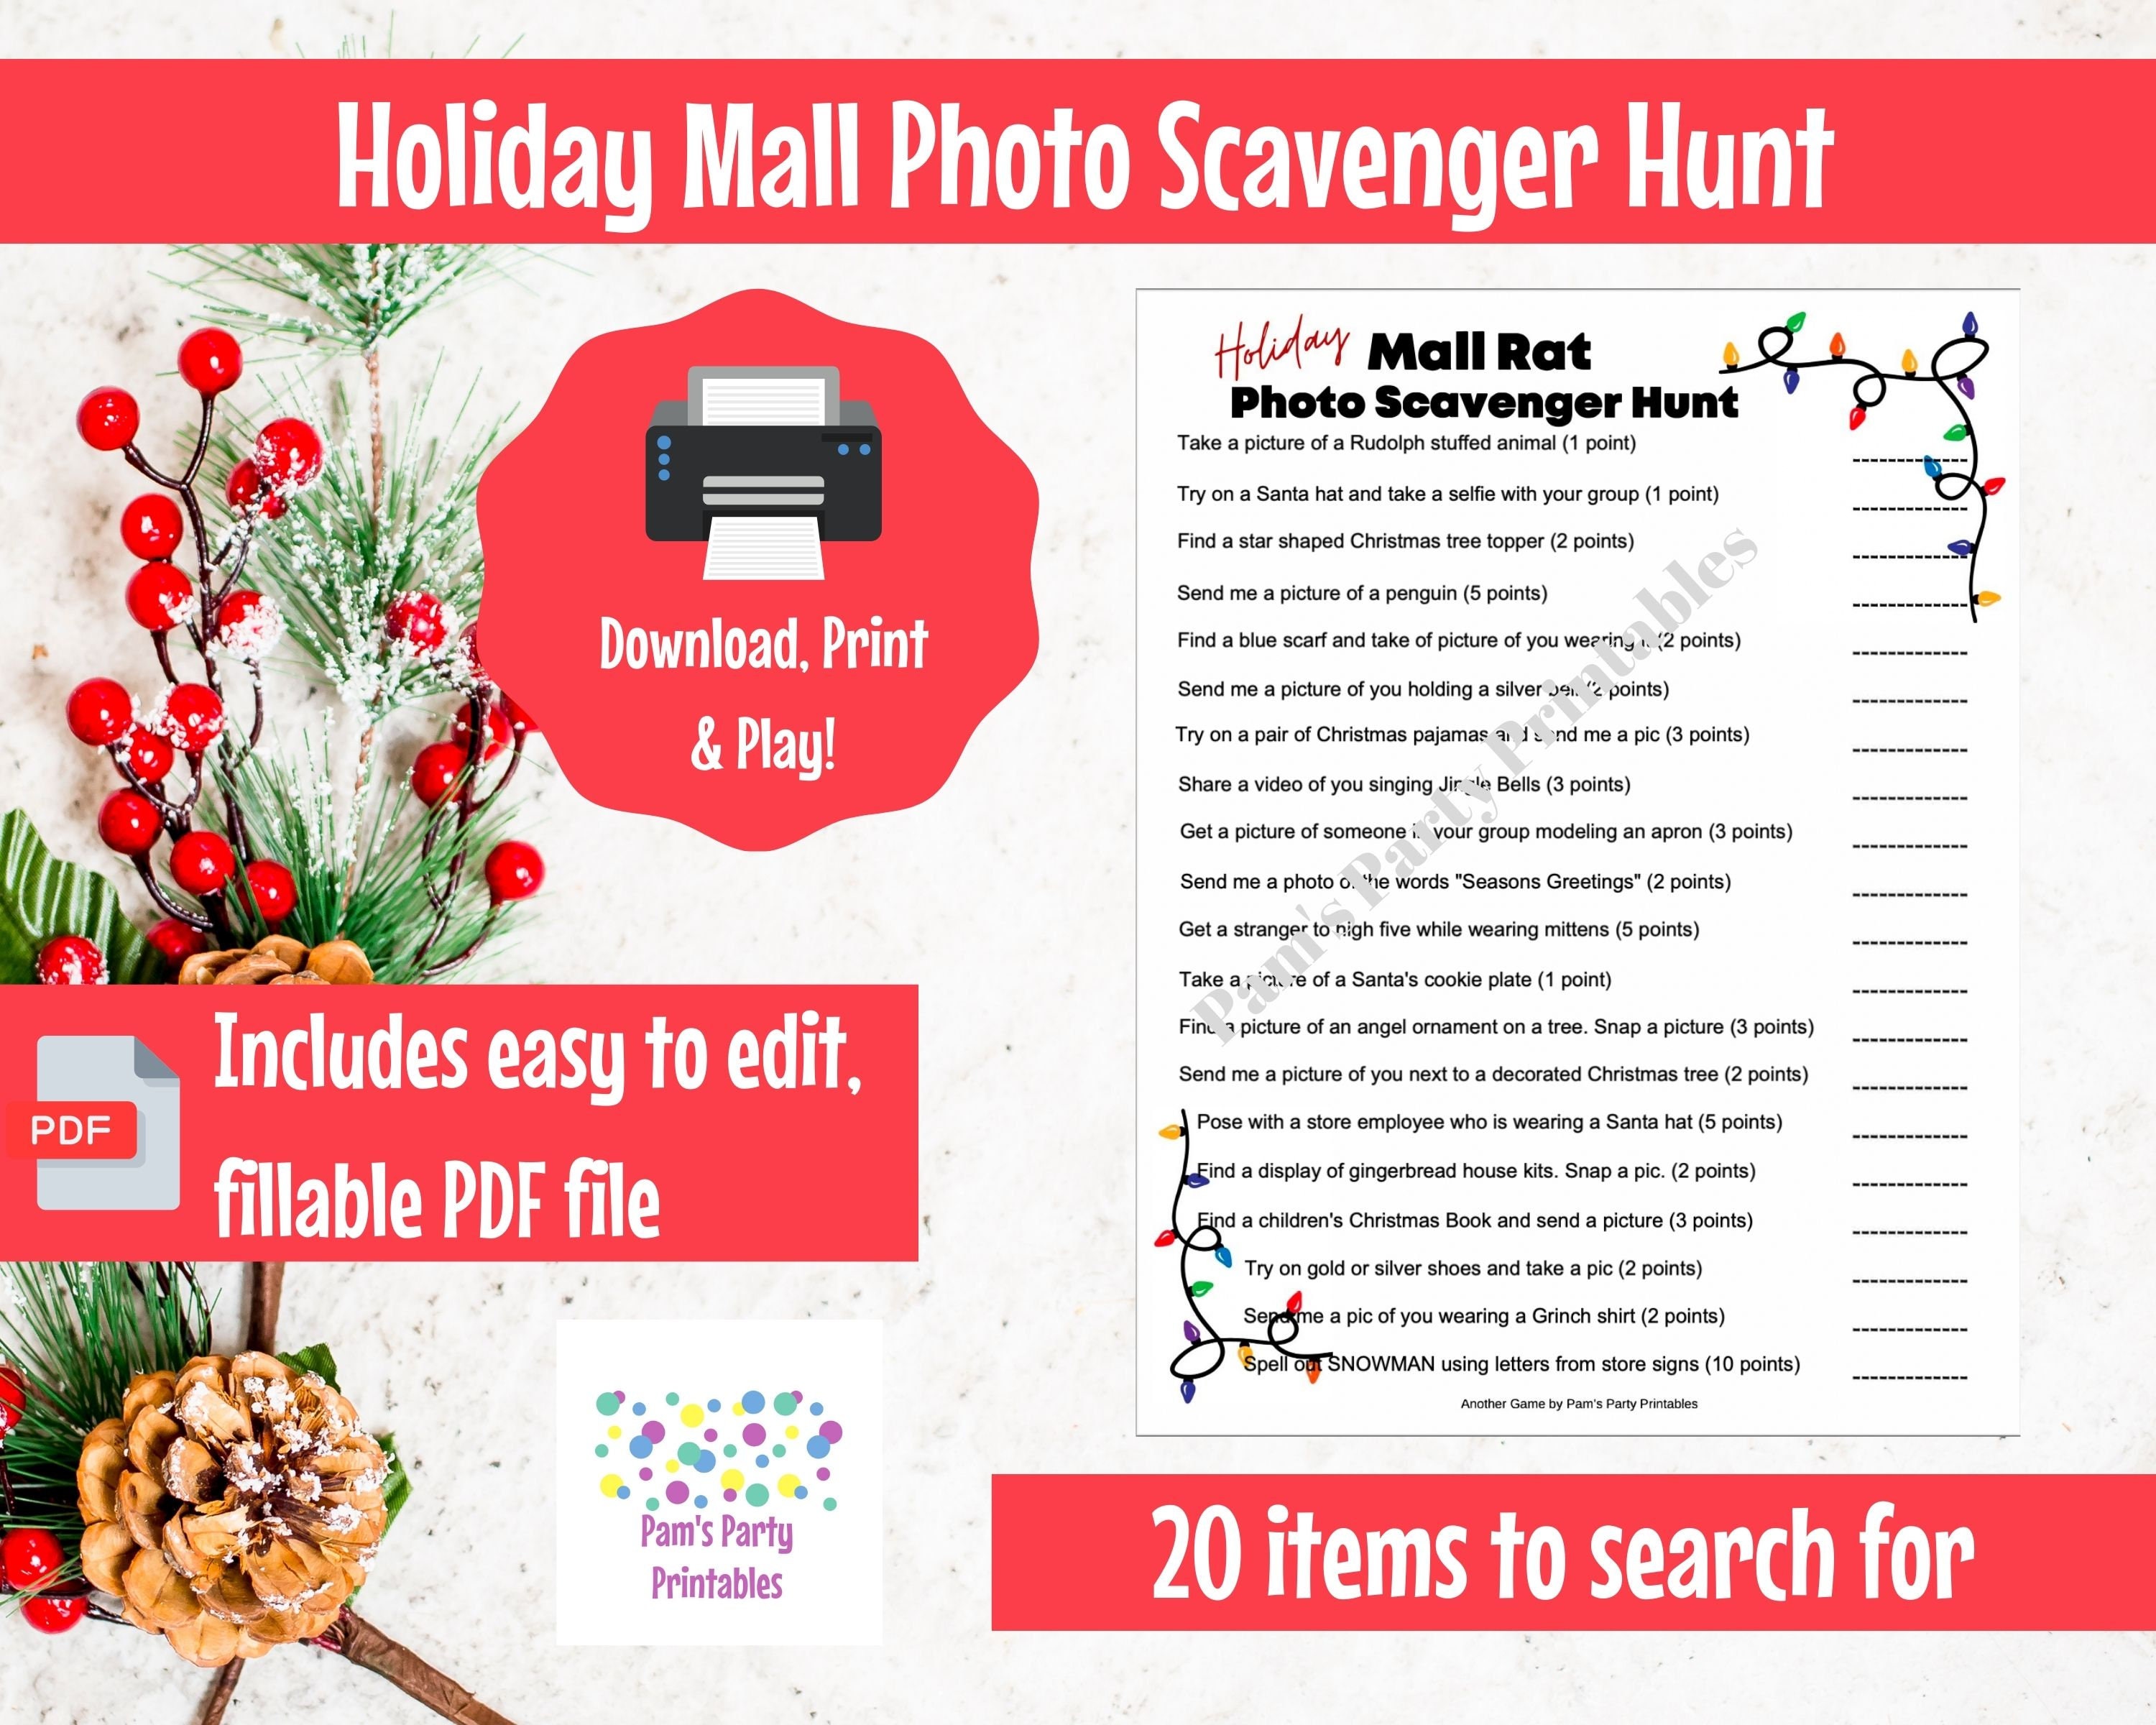 Adults Needing Activity Scavenger Hunt PDF,adult games,scavenger hunt  ideas,games,fun games,quarantined,adulting,family,activities,mom,dad